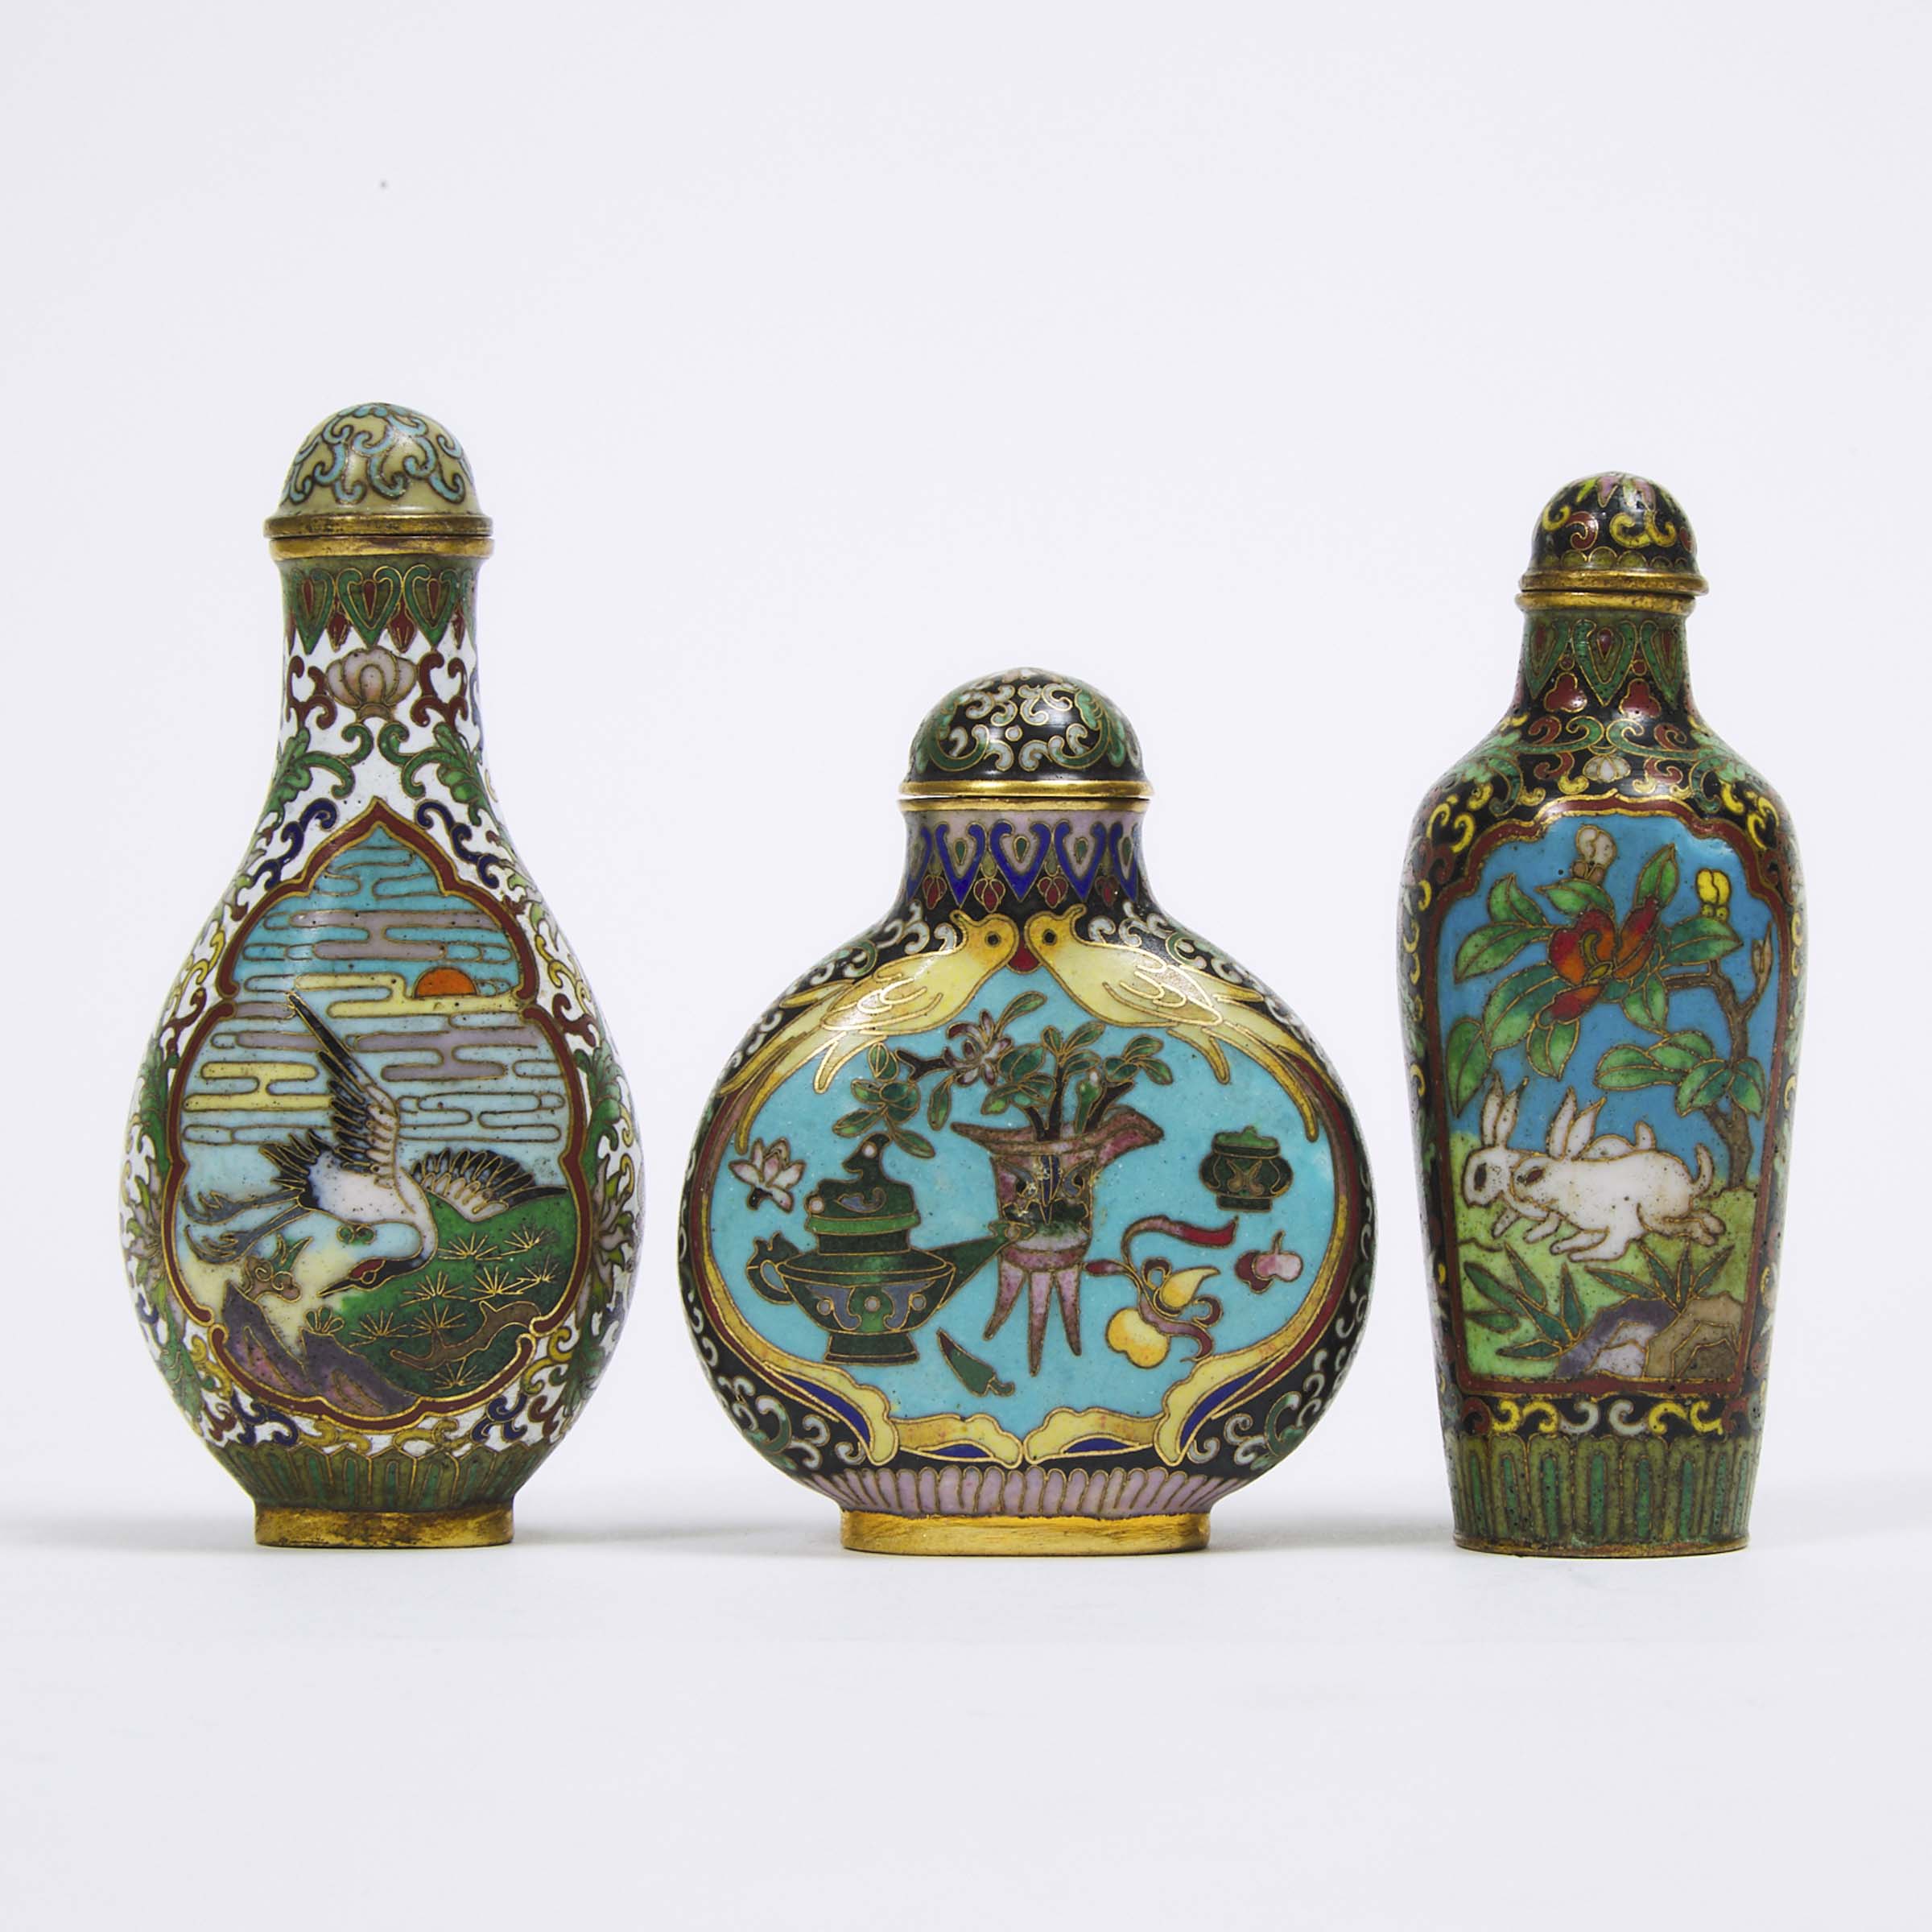 A Group of Three Cloisonné Snuff Bottles, 19th/20th Century